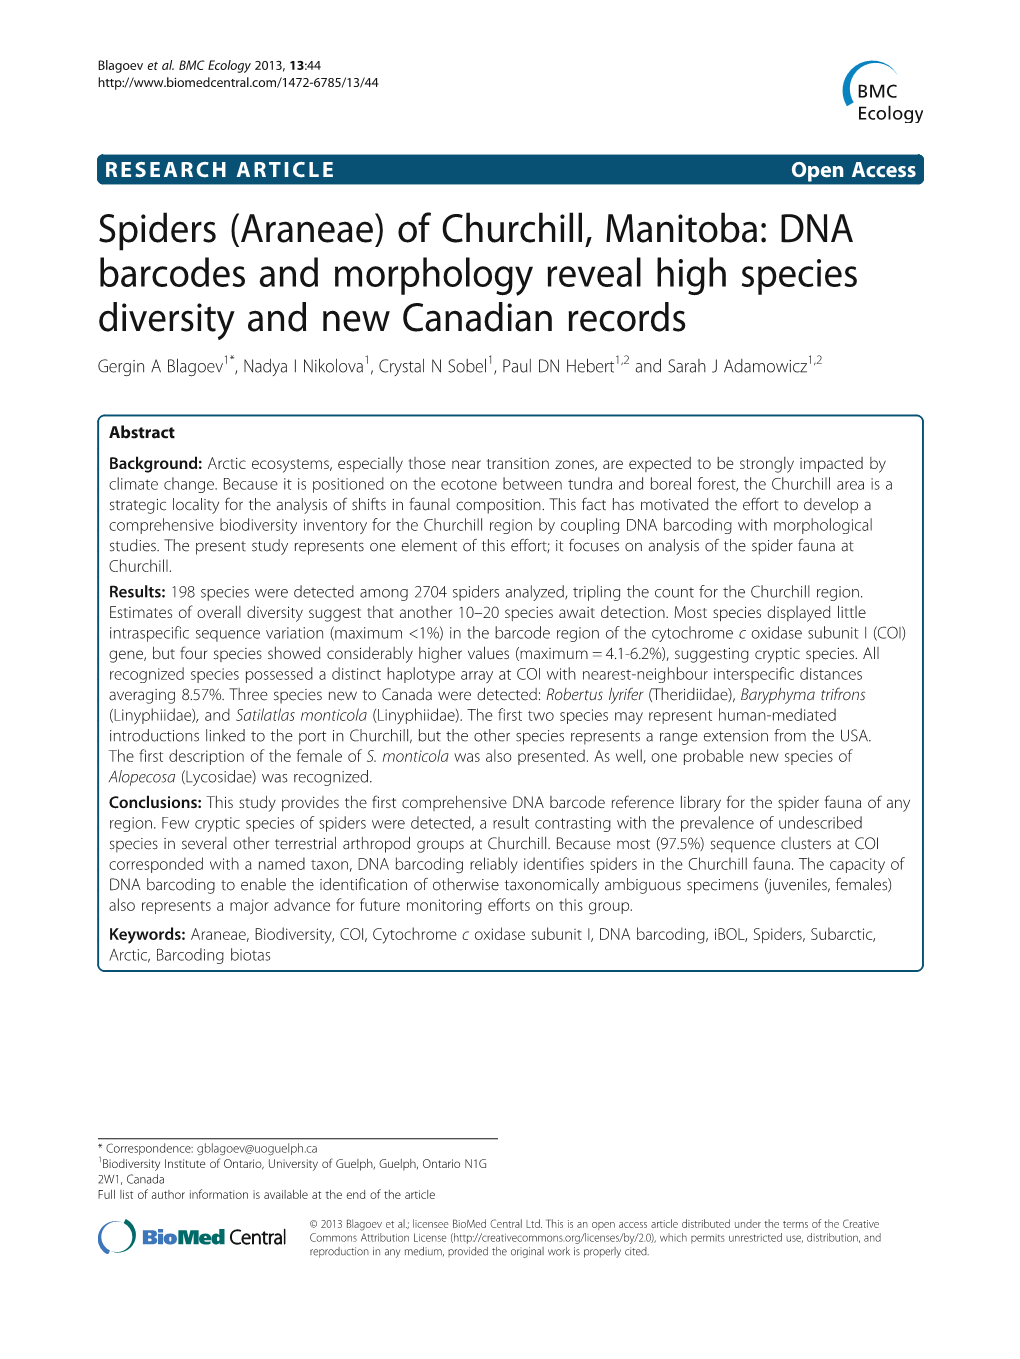 (Araneae) of Churchill, Manitoba: DNA Barcodes and Morphology Reveal